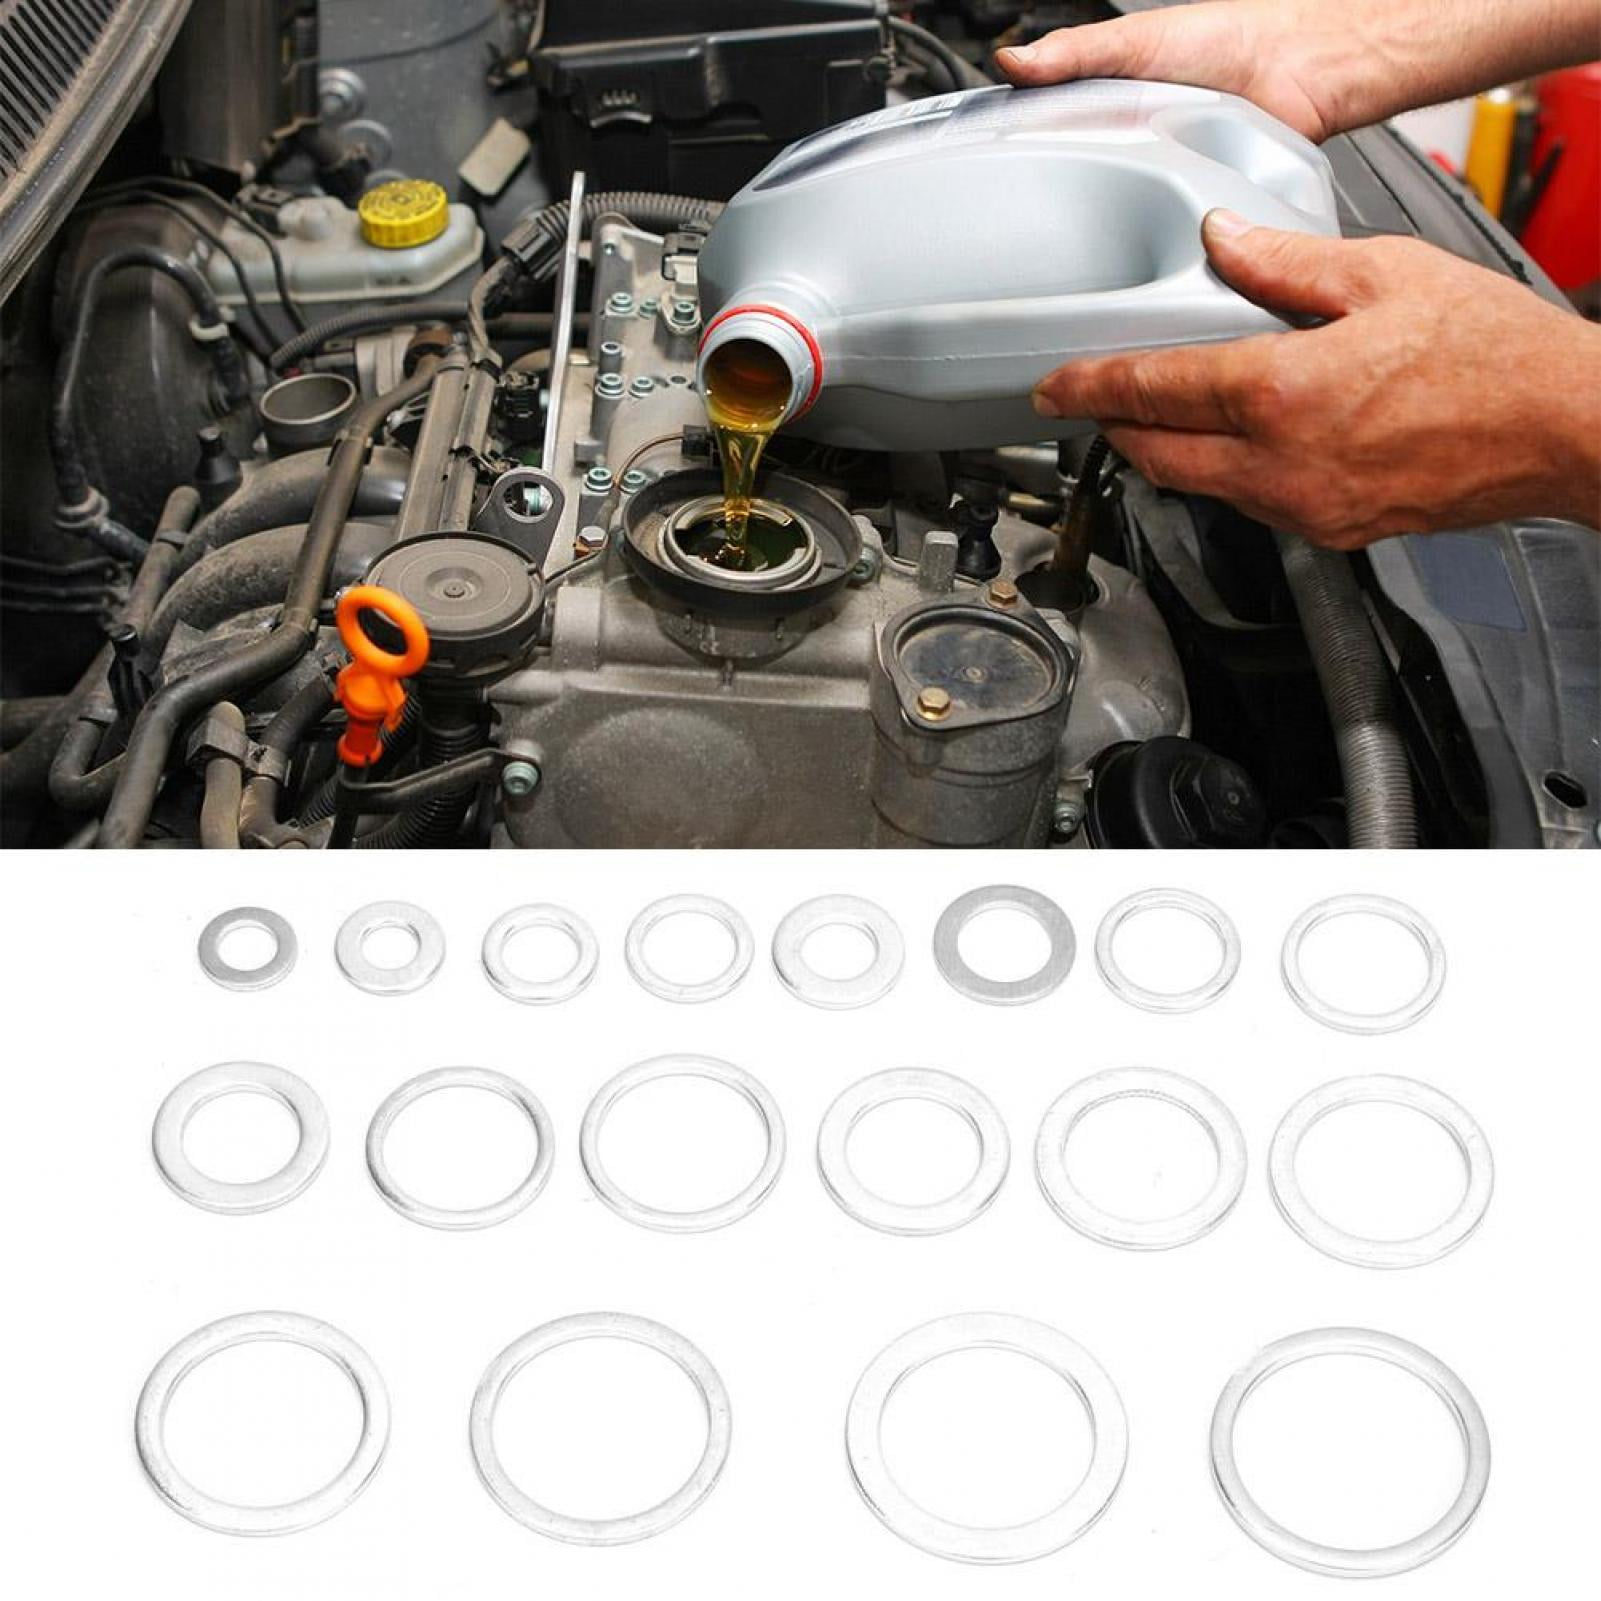 450pcs/Set Oil Drain Plug Gaskets Washer For Vehicles Motorcycle Boats With Case 